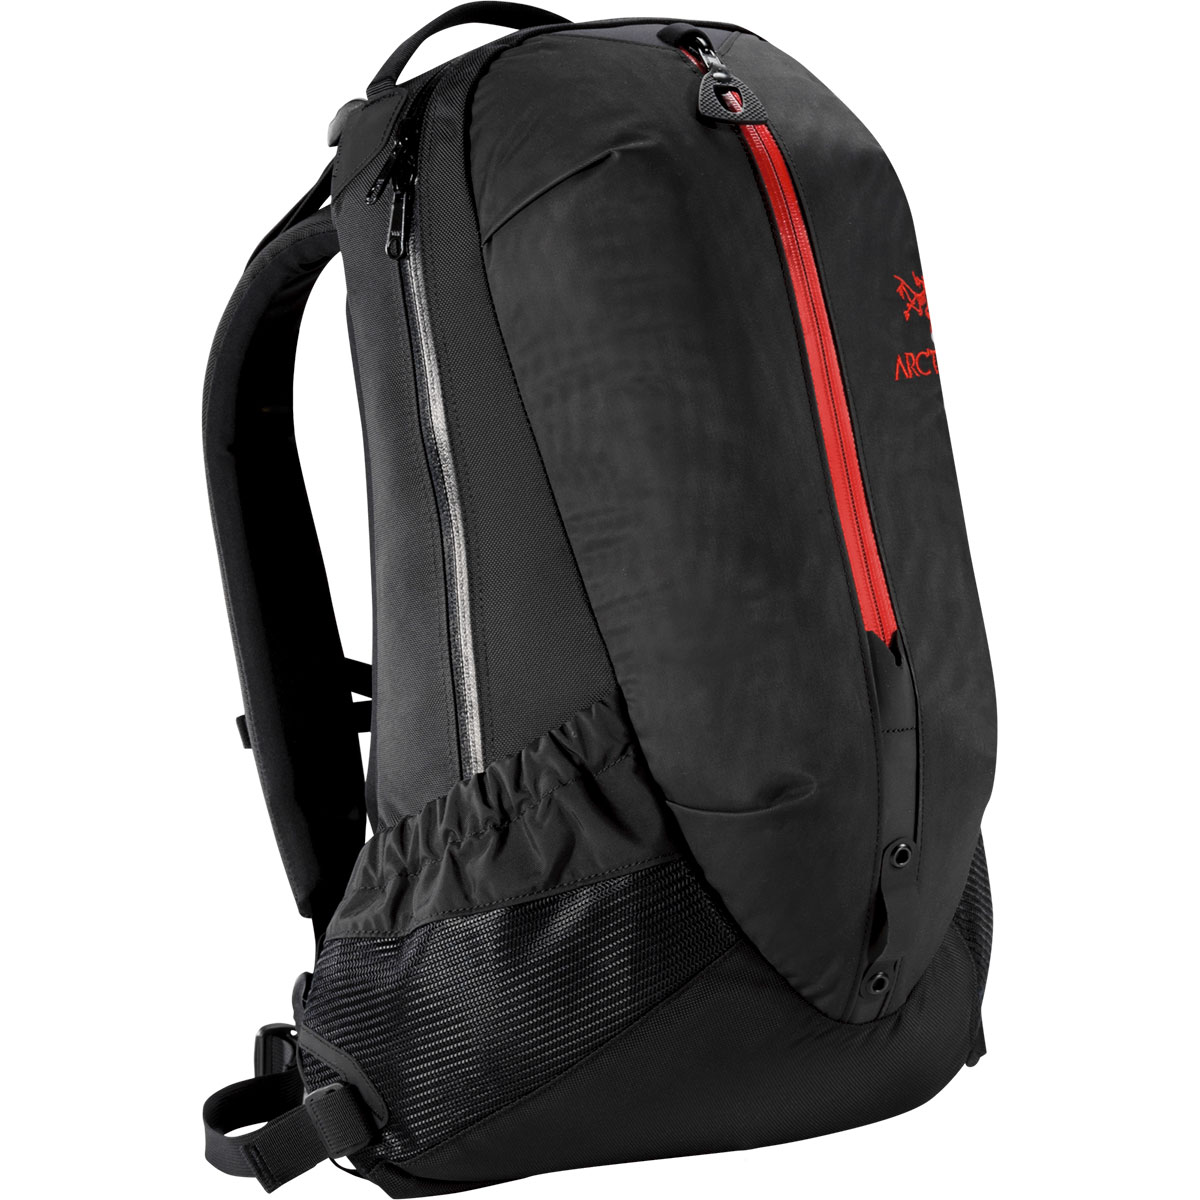 Arc'teryx Arro 22 Backpack, discontinued colors (free ground shipping) :: Daypacks and ...1200 x 1200